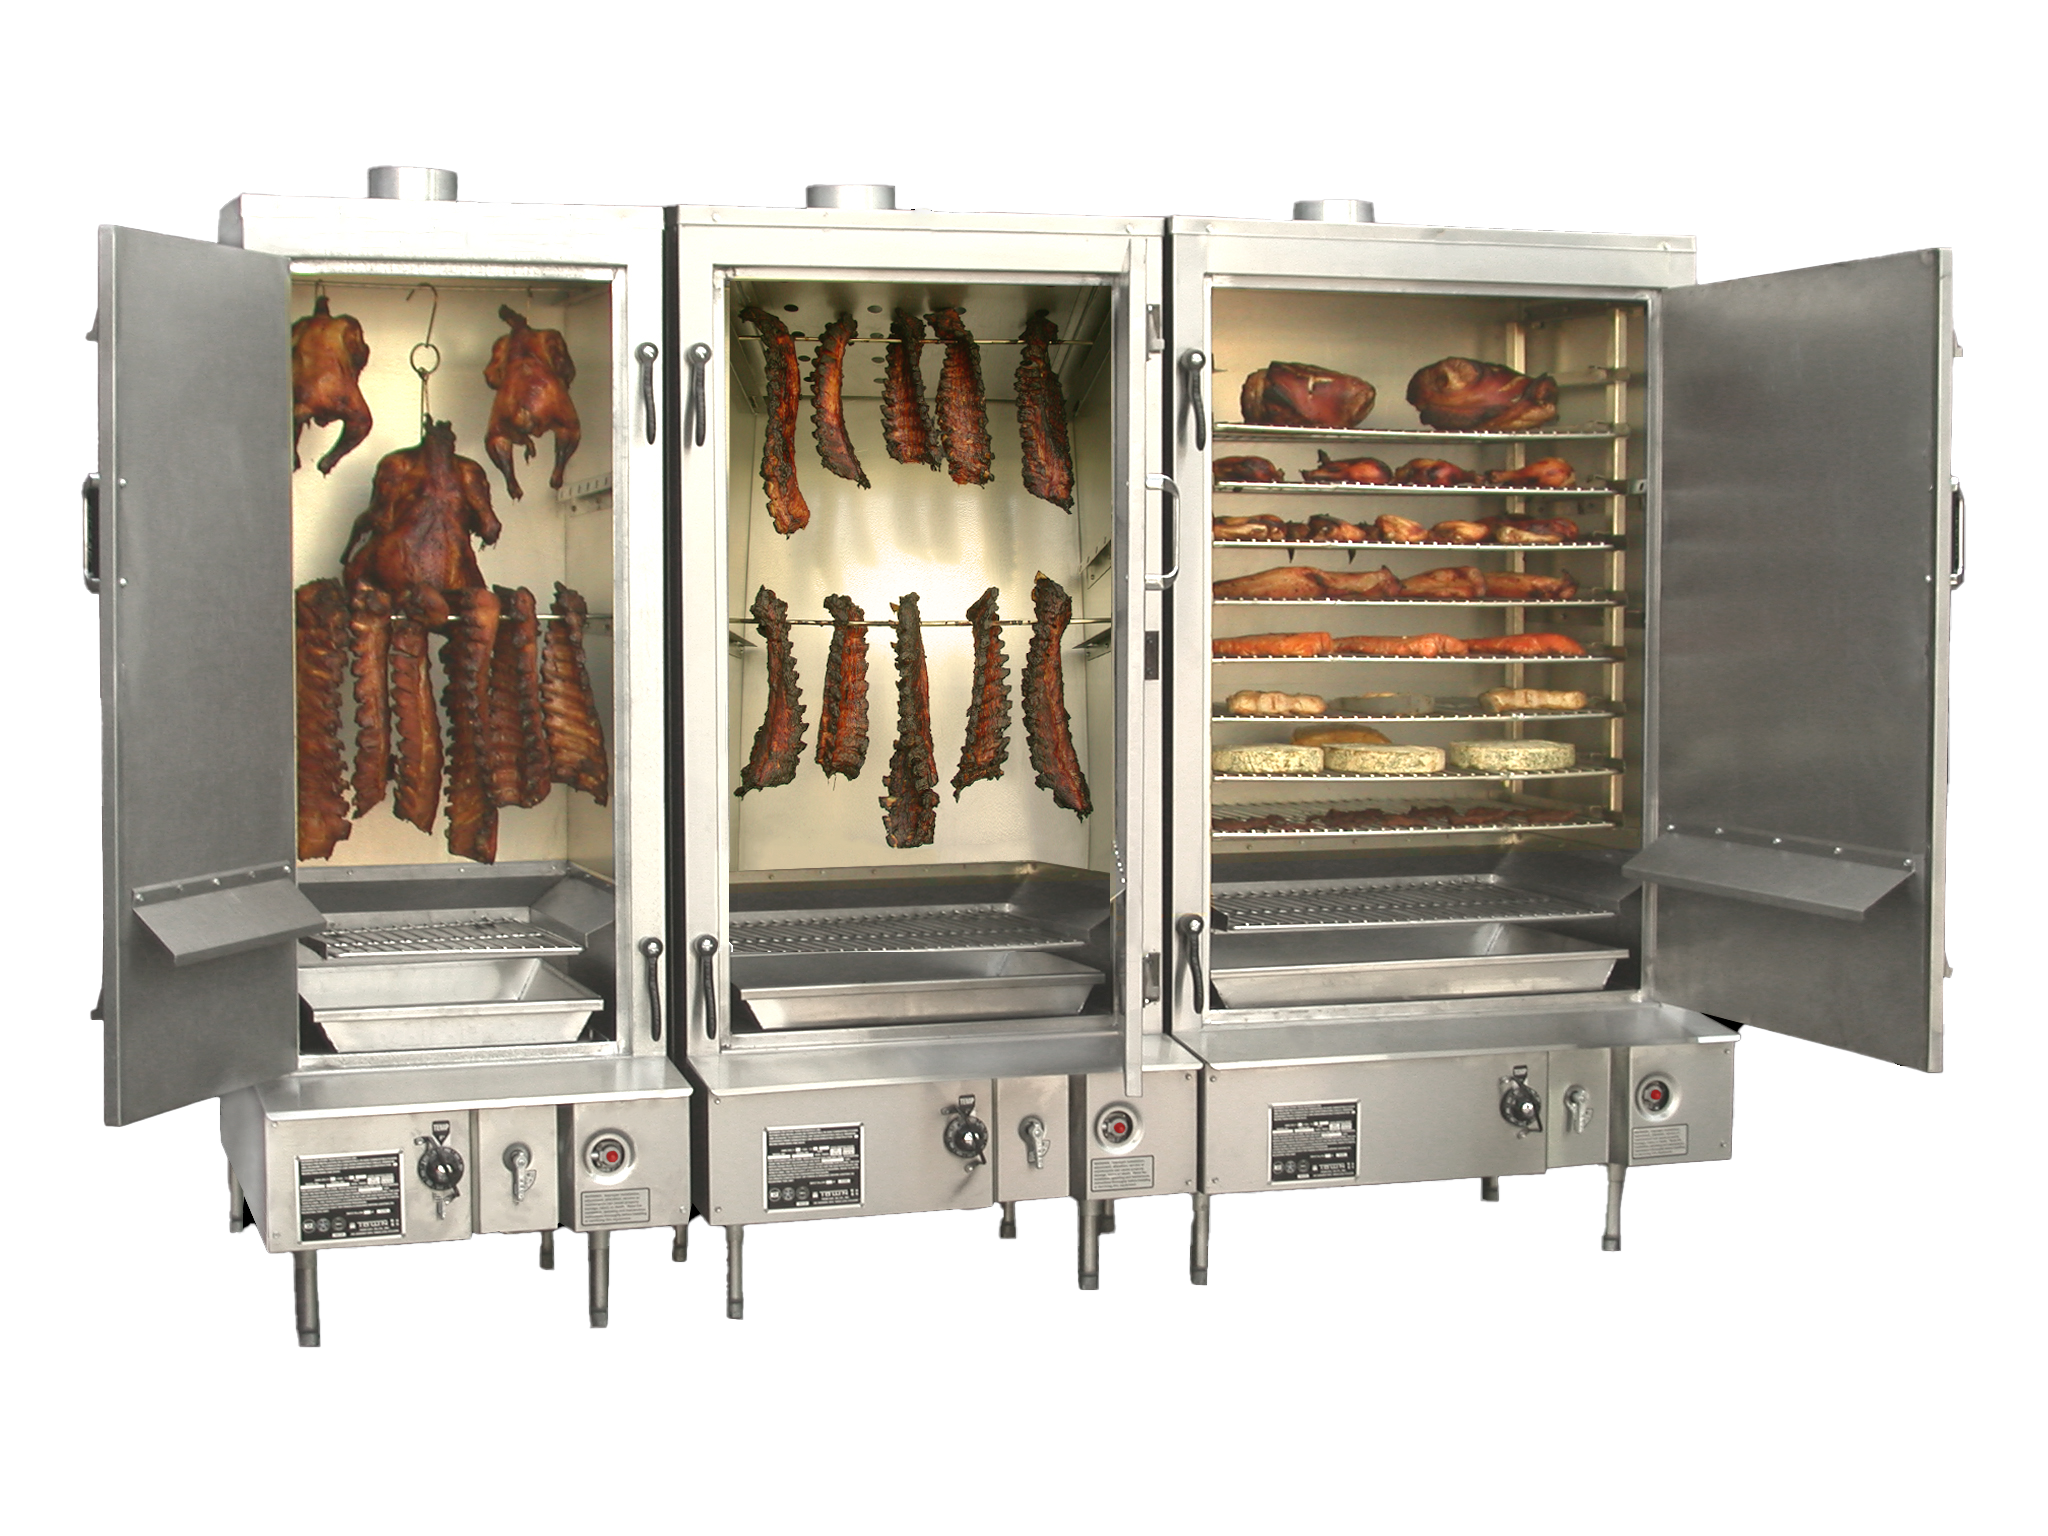 https://townfood.com/wp-content/uploads/2020/05/smokehouse-assorted-meat-3-units.png